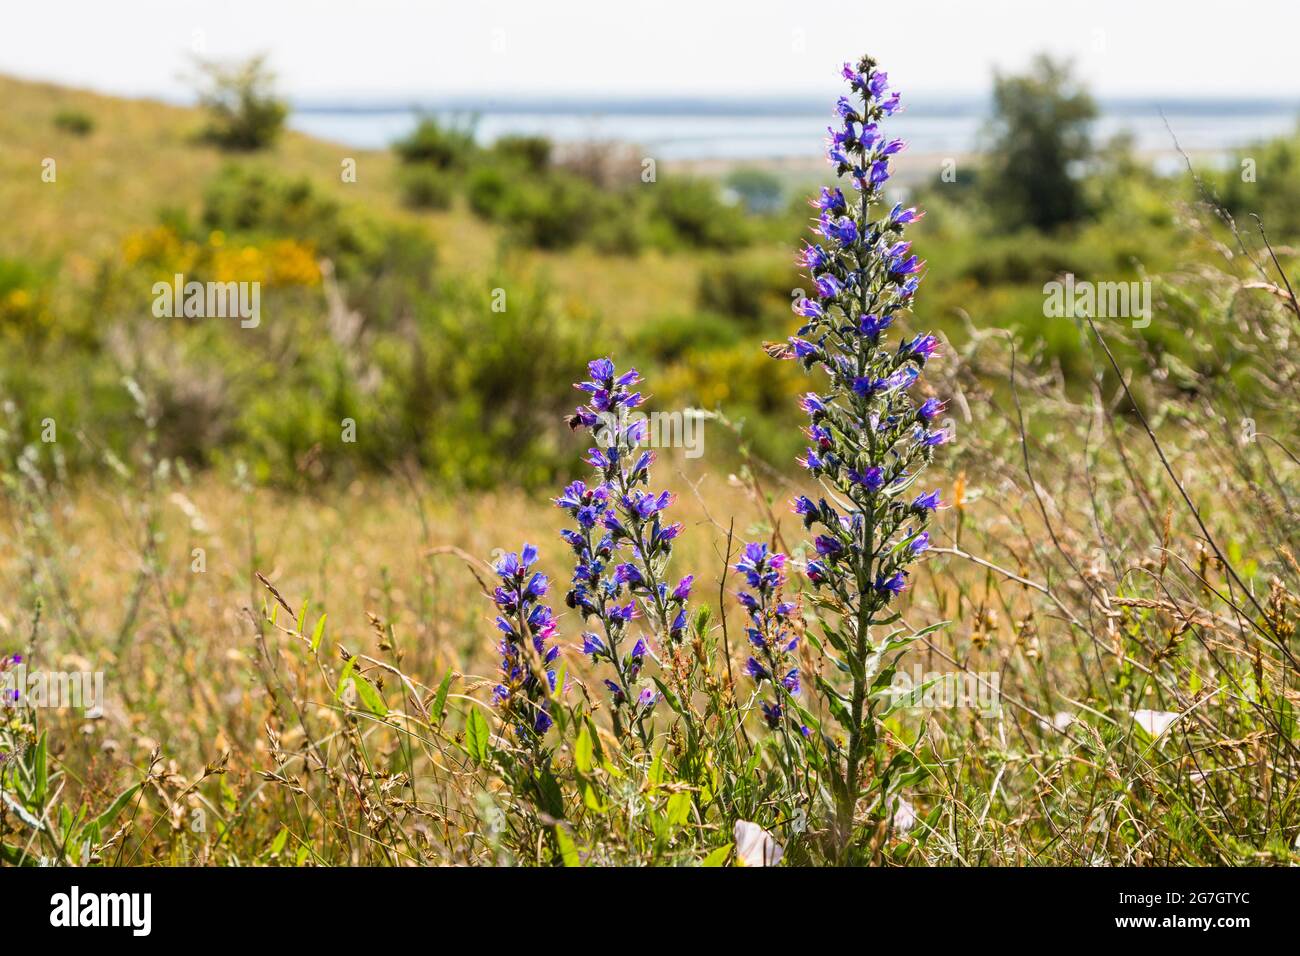 blueweed, blue devil, viper's bugloss, common viper's-bugloss (Echium vulgare), blooming in coastal landscape, Germany, Hiddensee Stock Photo